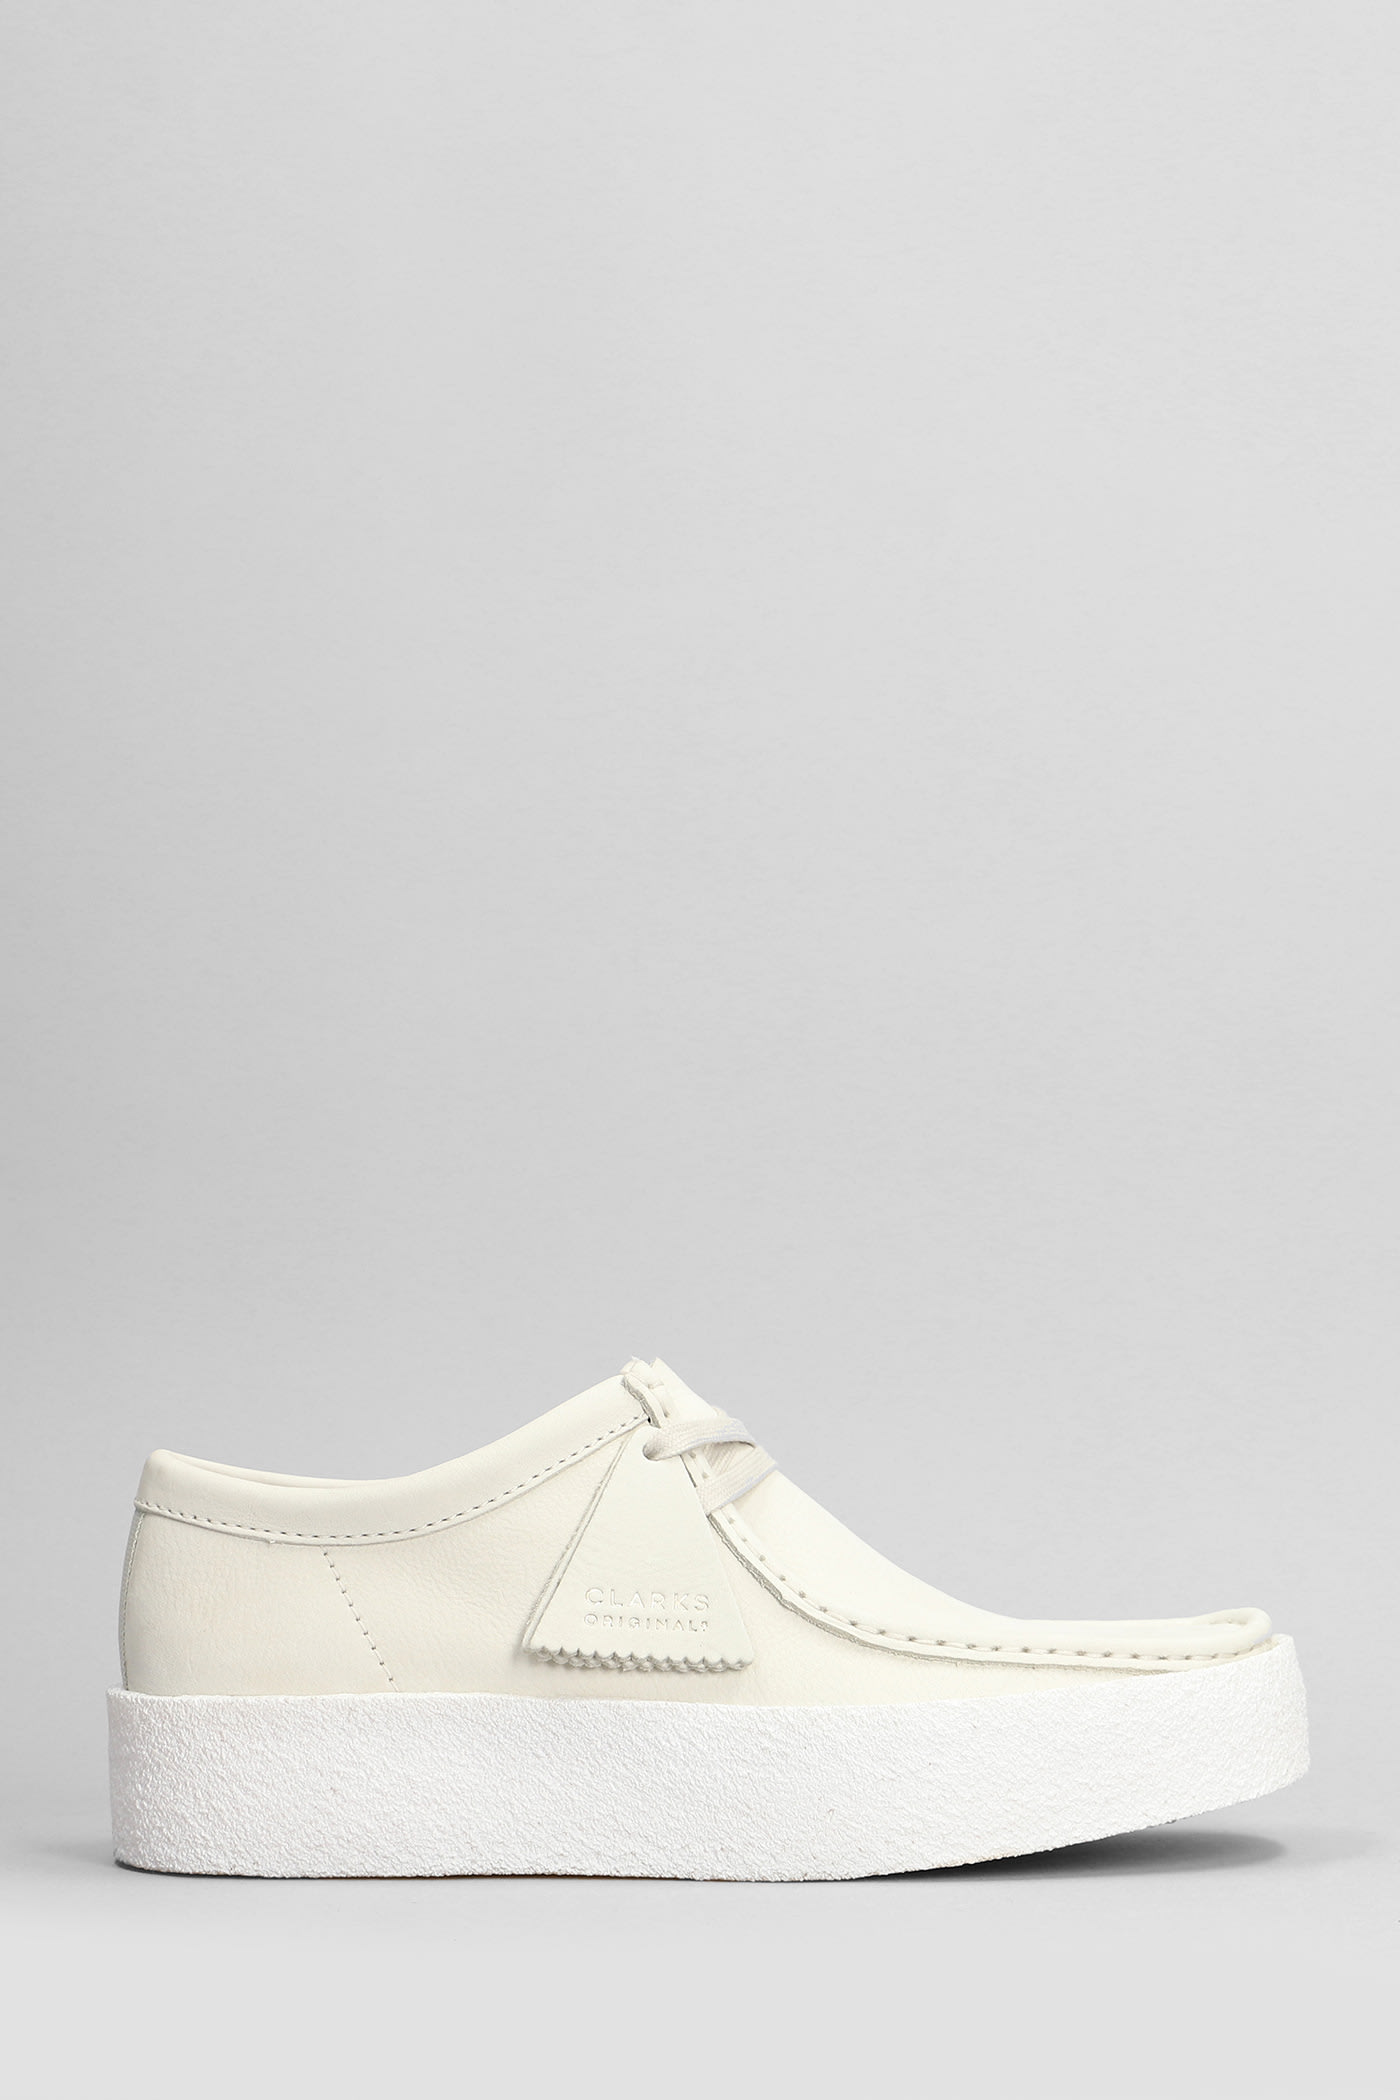 Clarks Wallabee Cup Lace Up Shoes In White Nubuck